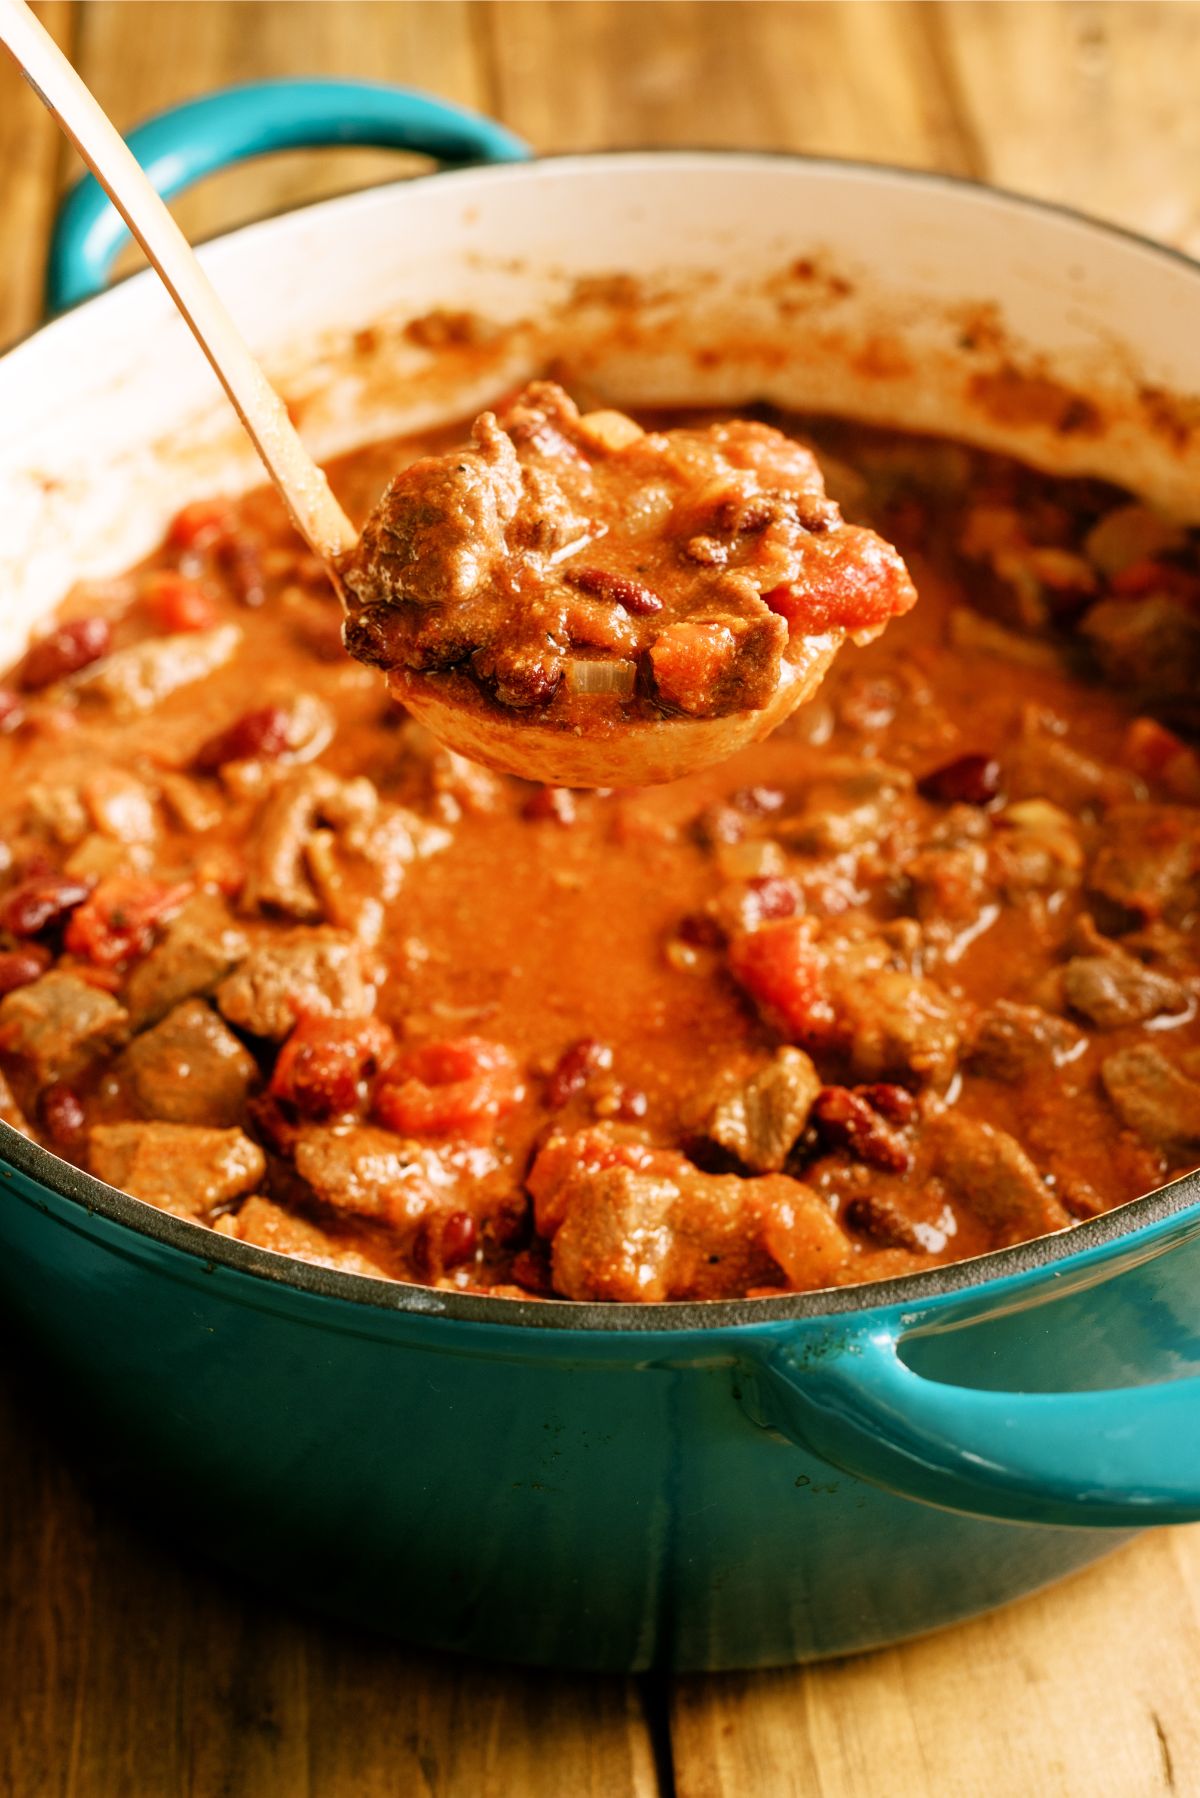 Large pot with a ladle full of Texas Roadhouse Copycat Chili